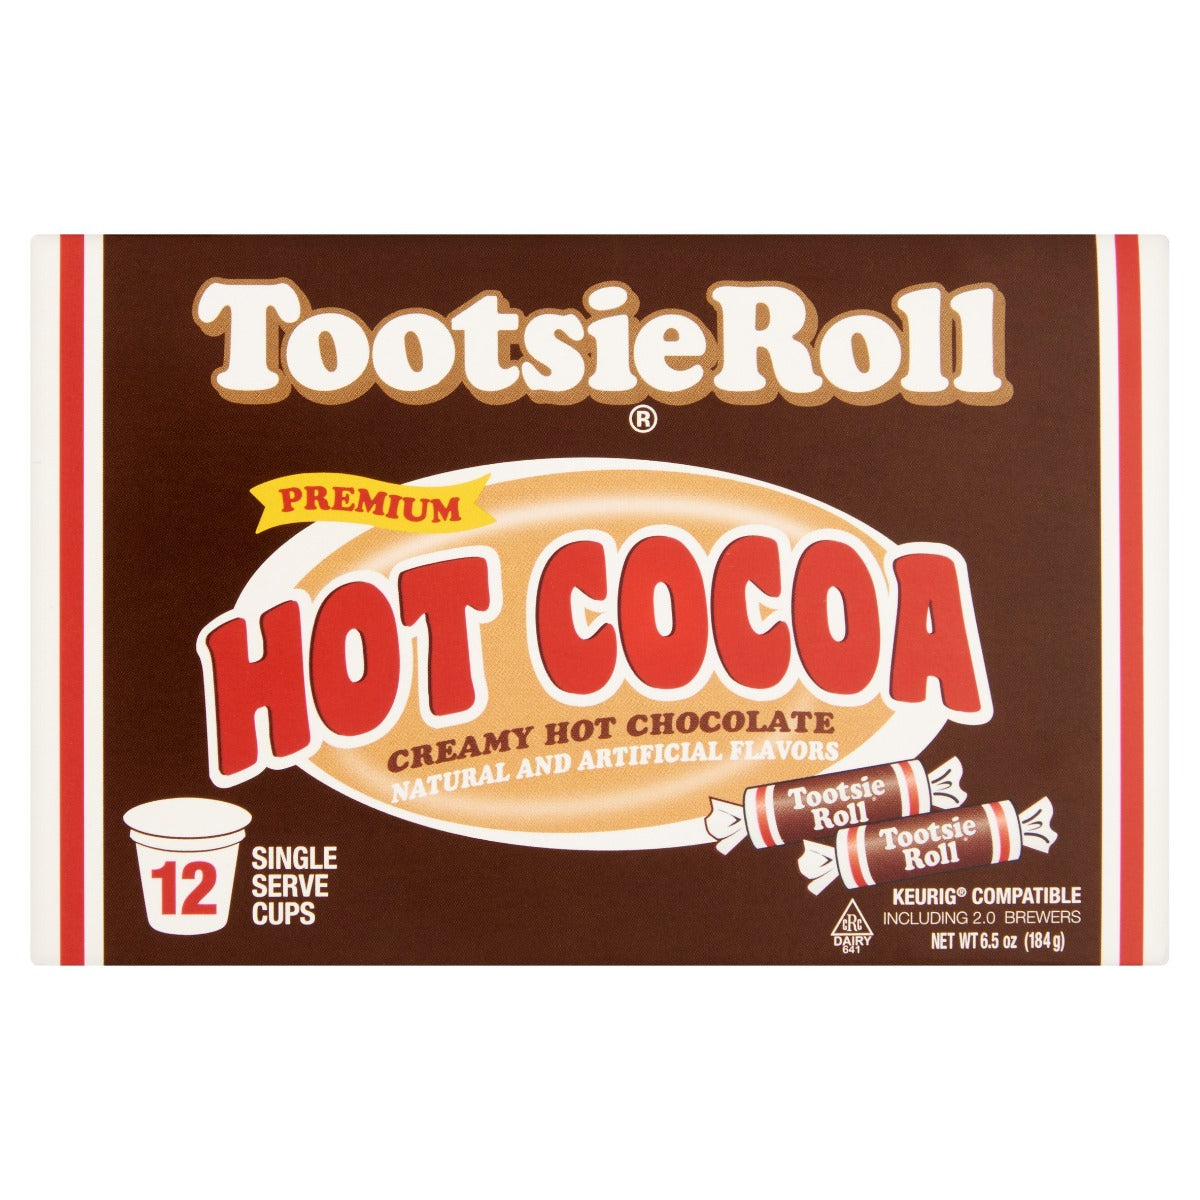 COCOA HOT TOOTSIE ROLL: Cocoa Hot Tootsie Roll, 12 pc - Vending Business Solutions